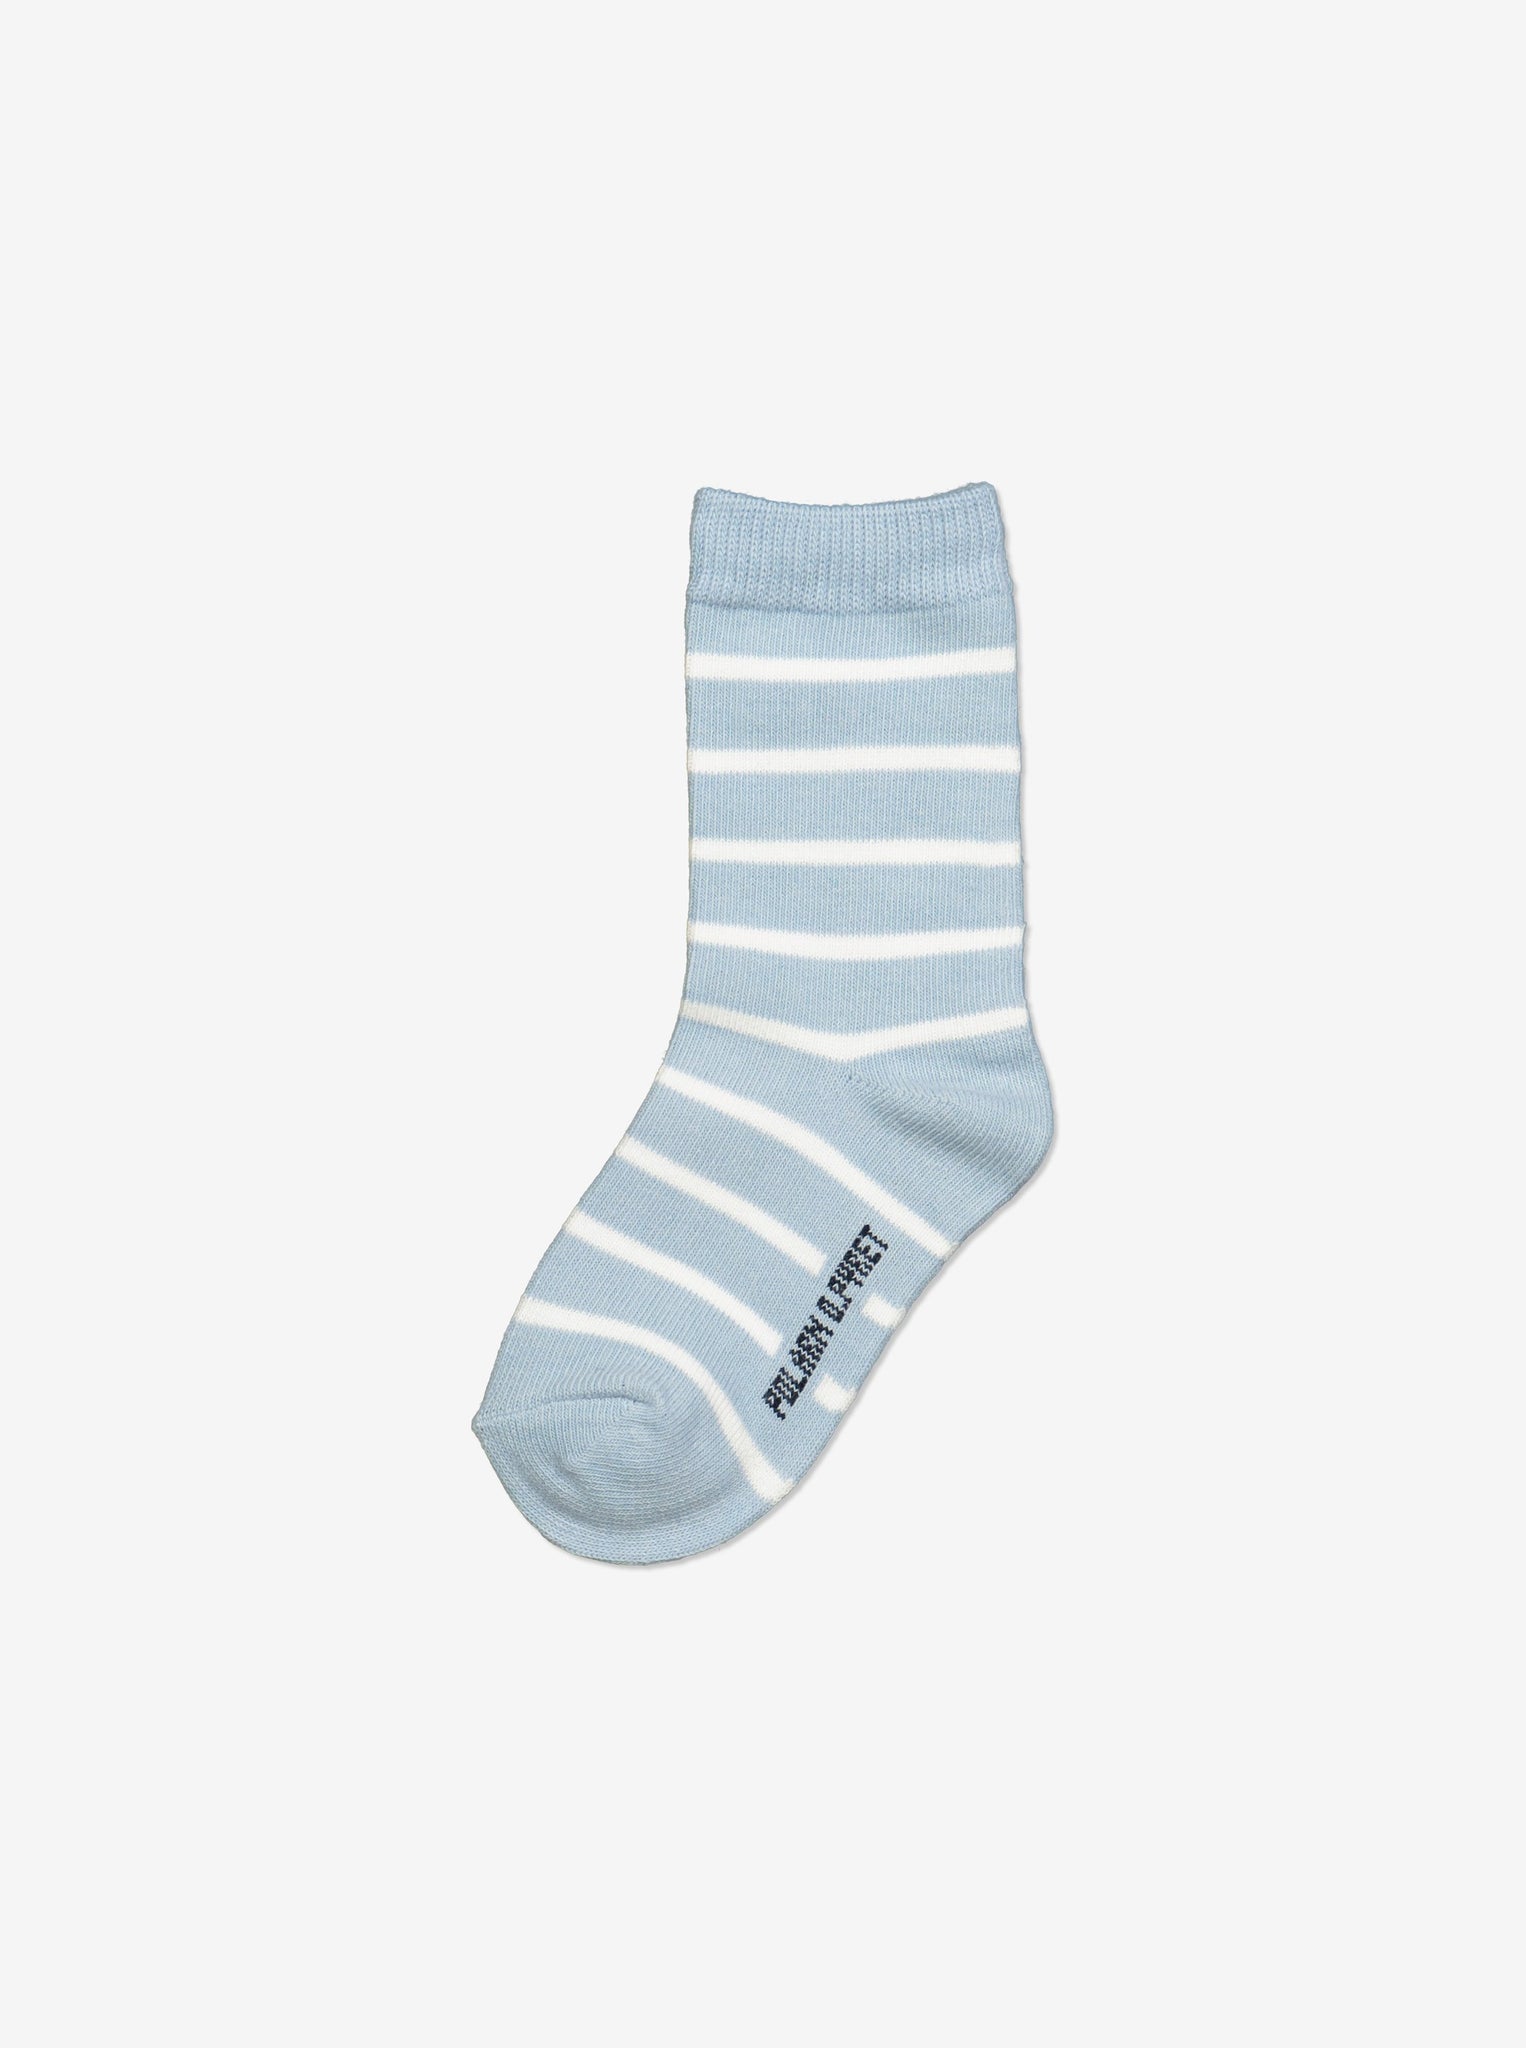  Organic Blue Kids Socks Multipack from Polarn O. Pyret Kidswear. Made from eco-friendly materials.